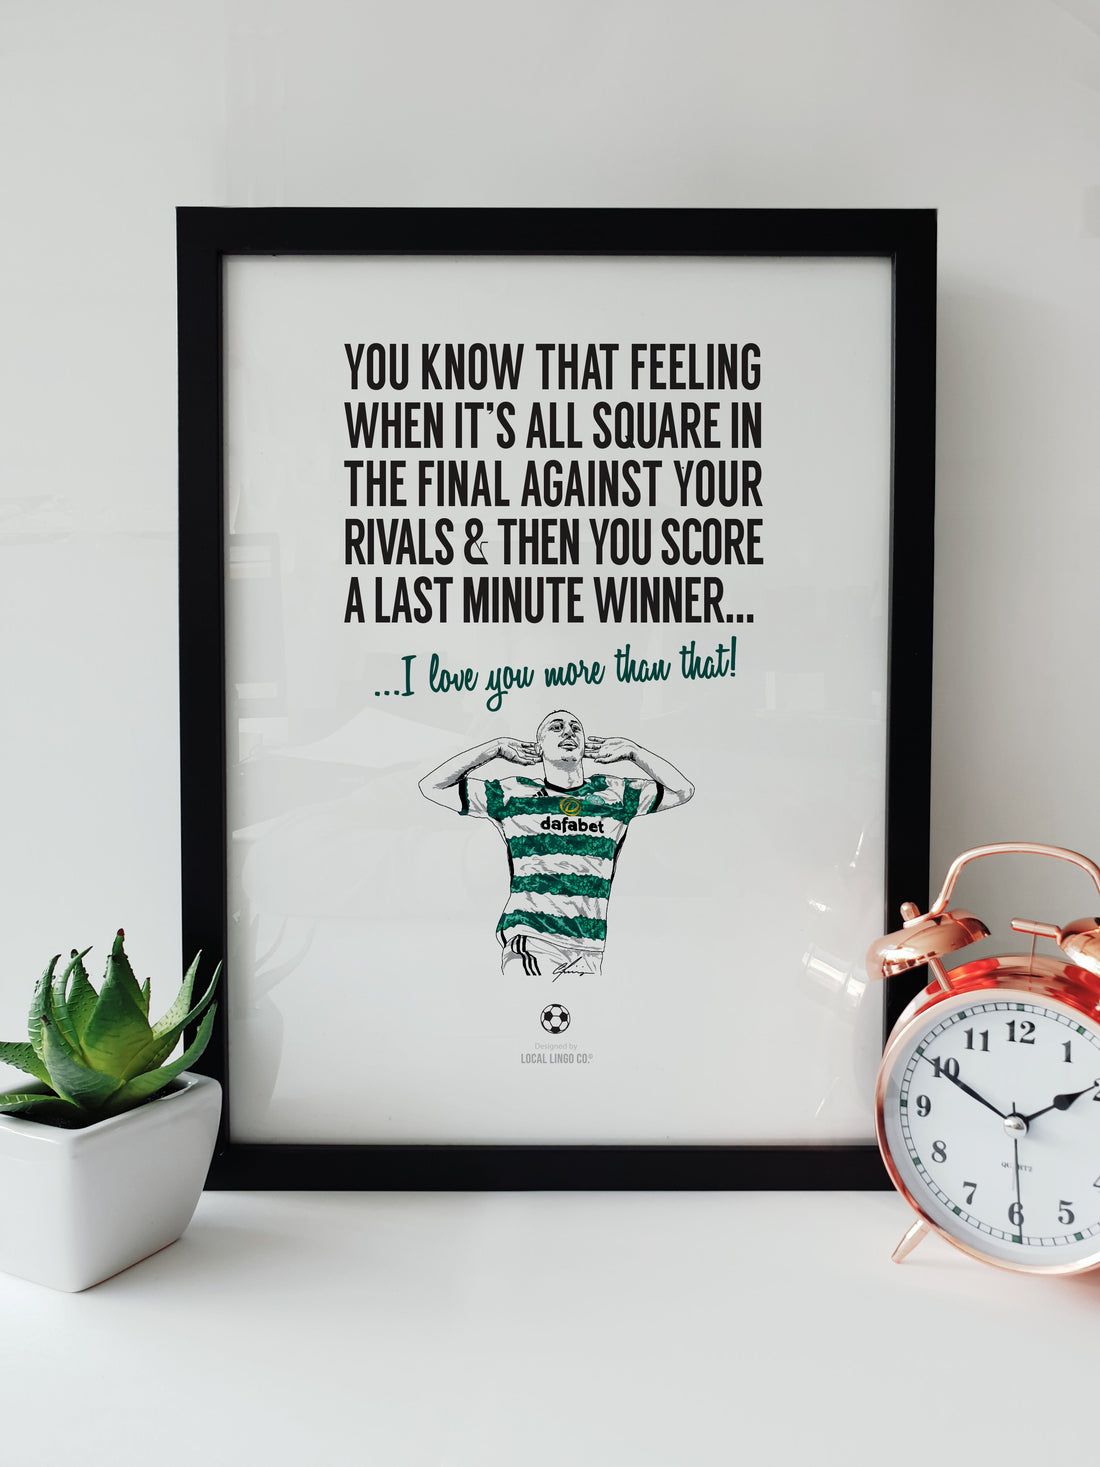 Last Minute Winner - Adam Idah's Goal - Celtic vs. Rangers Scottish Cup Final Print by Local Lingo, featuring a jubilant Adam Idah and bold text celebrating a dramatic victory, in a black frame.